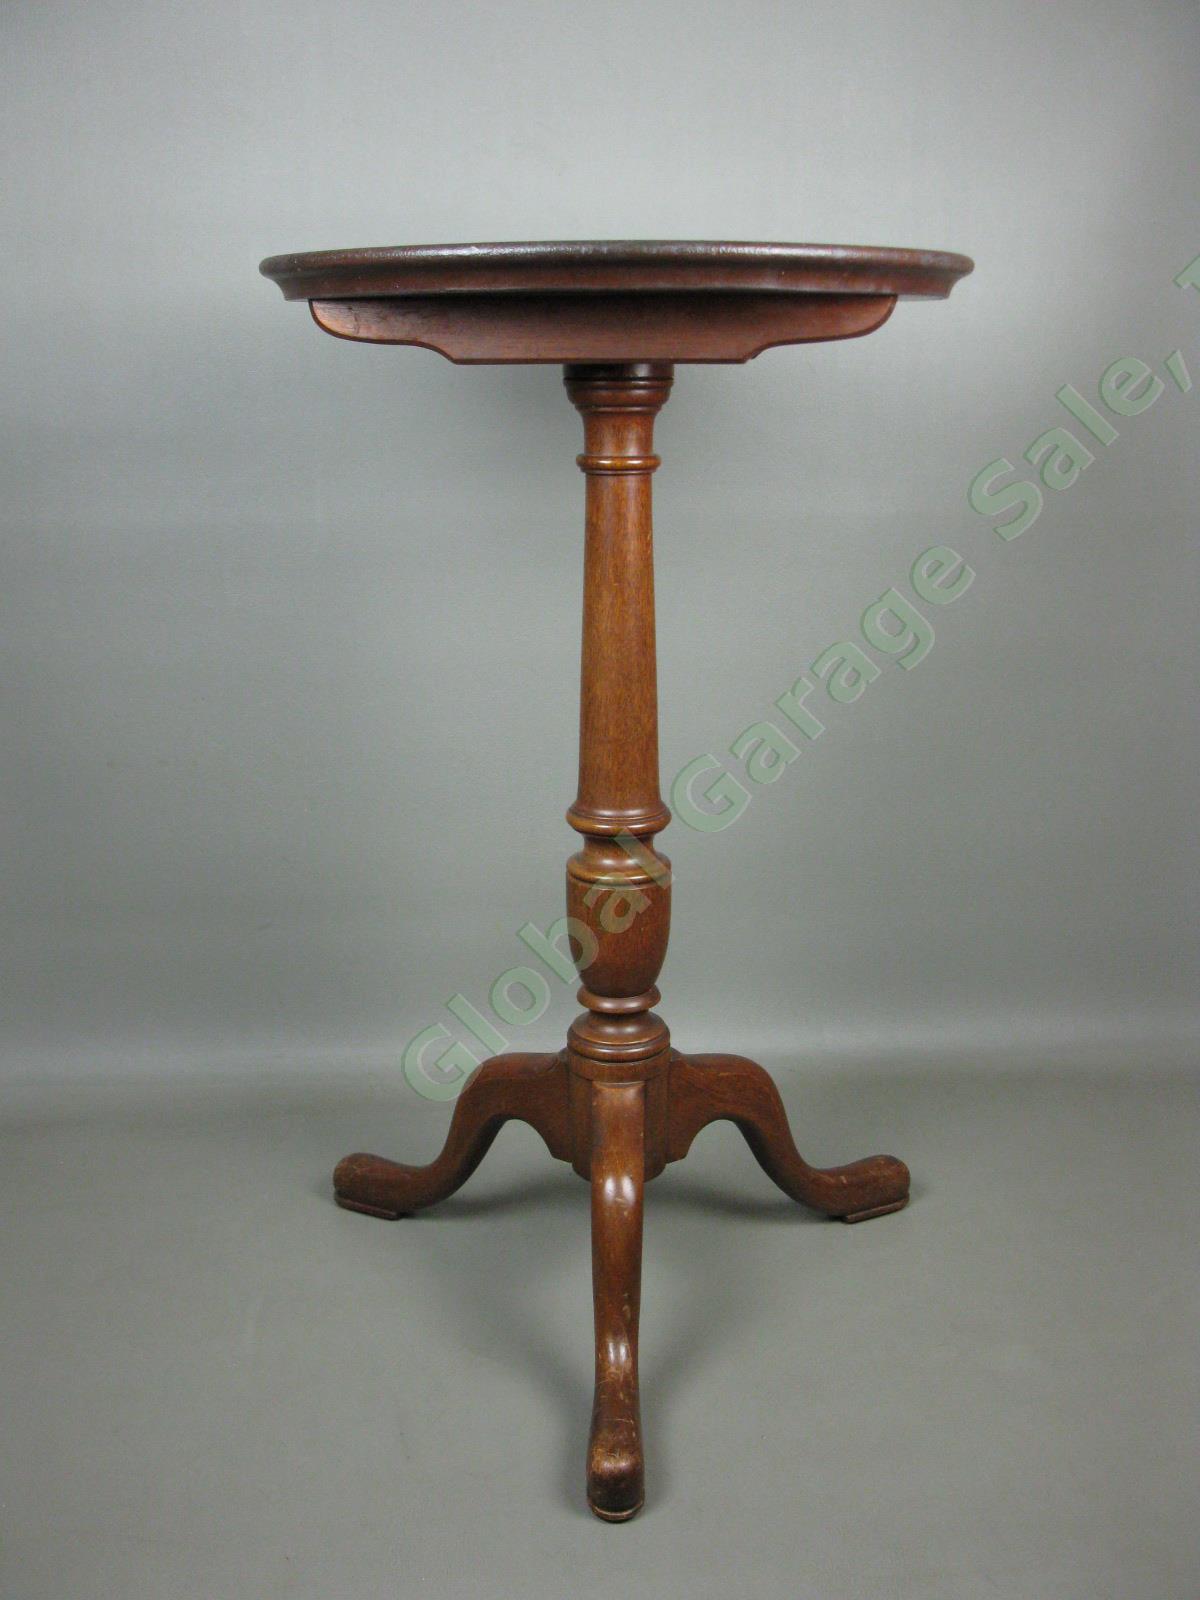 Vtg Biggs Furniture Virginia Mahogany Center Spindle Candle Stand Table 25" x15"